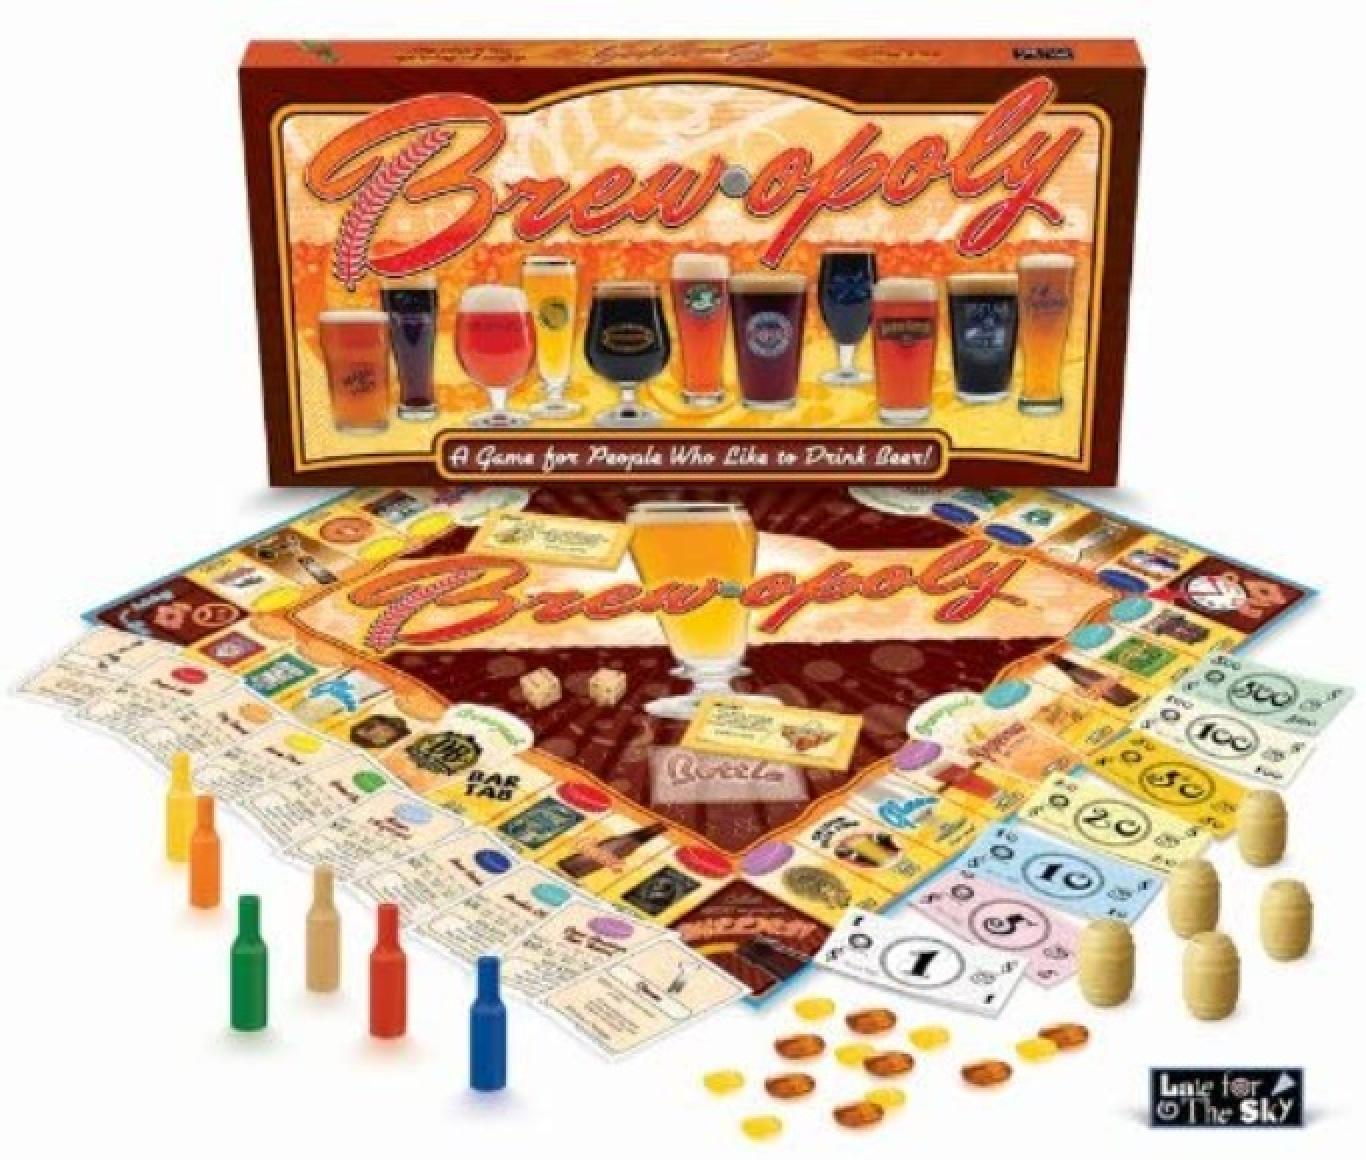 Brew-opoly Board Game Pieces